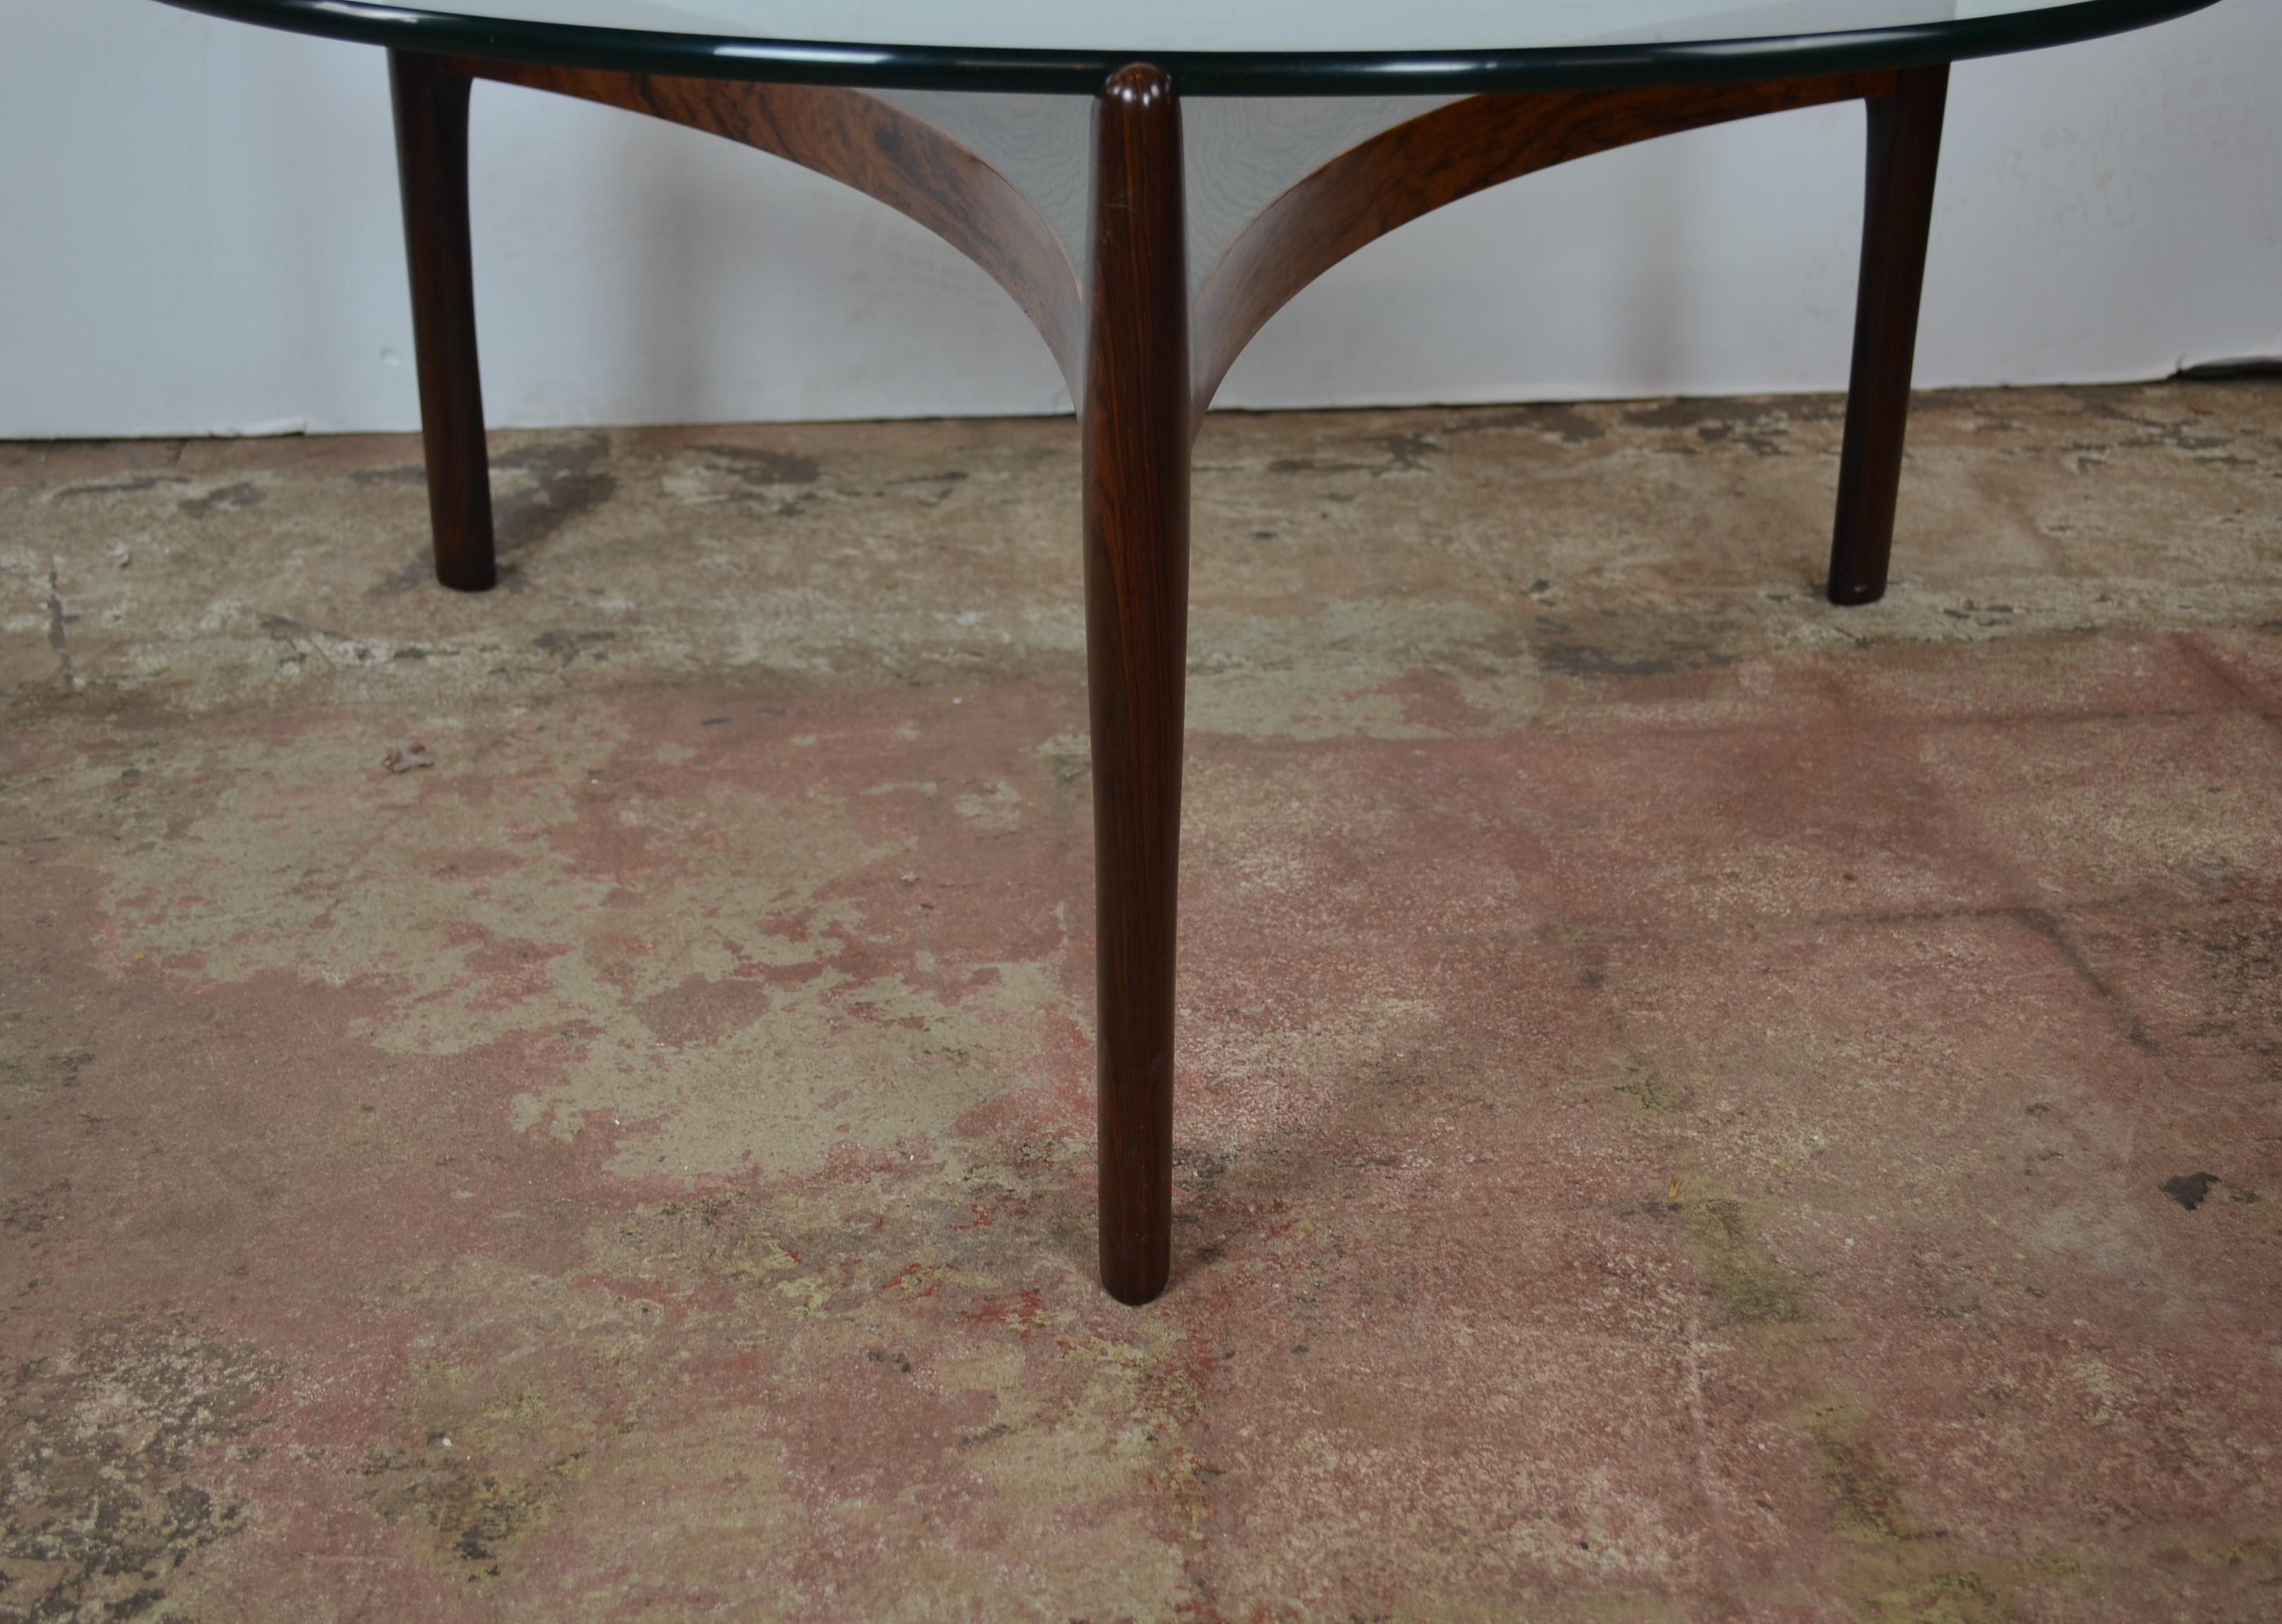 Rosewood reverse trefoil and round glass coffee table. A fine example of refined Danish design. Clean and sleek lines, bookmatched six part parquetry center. Three legs are notched at the top to secure the 1/2